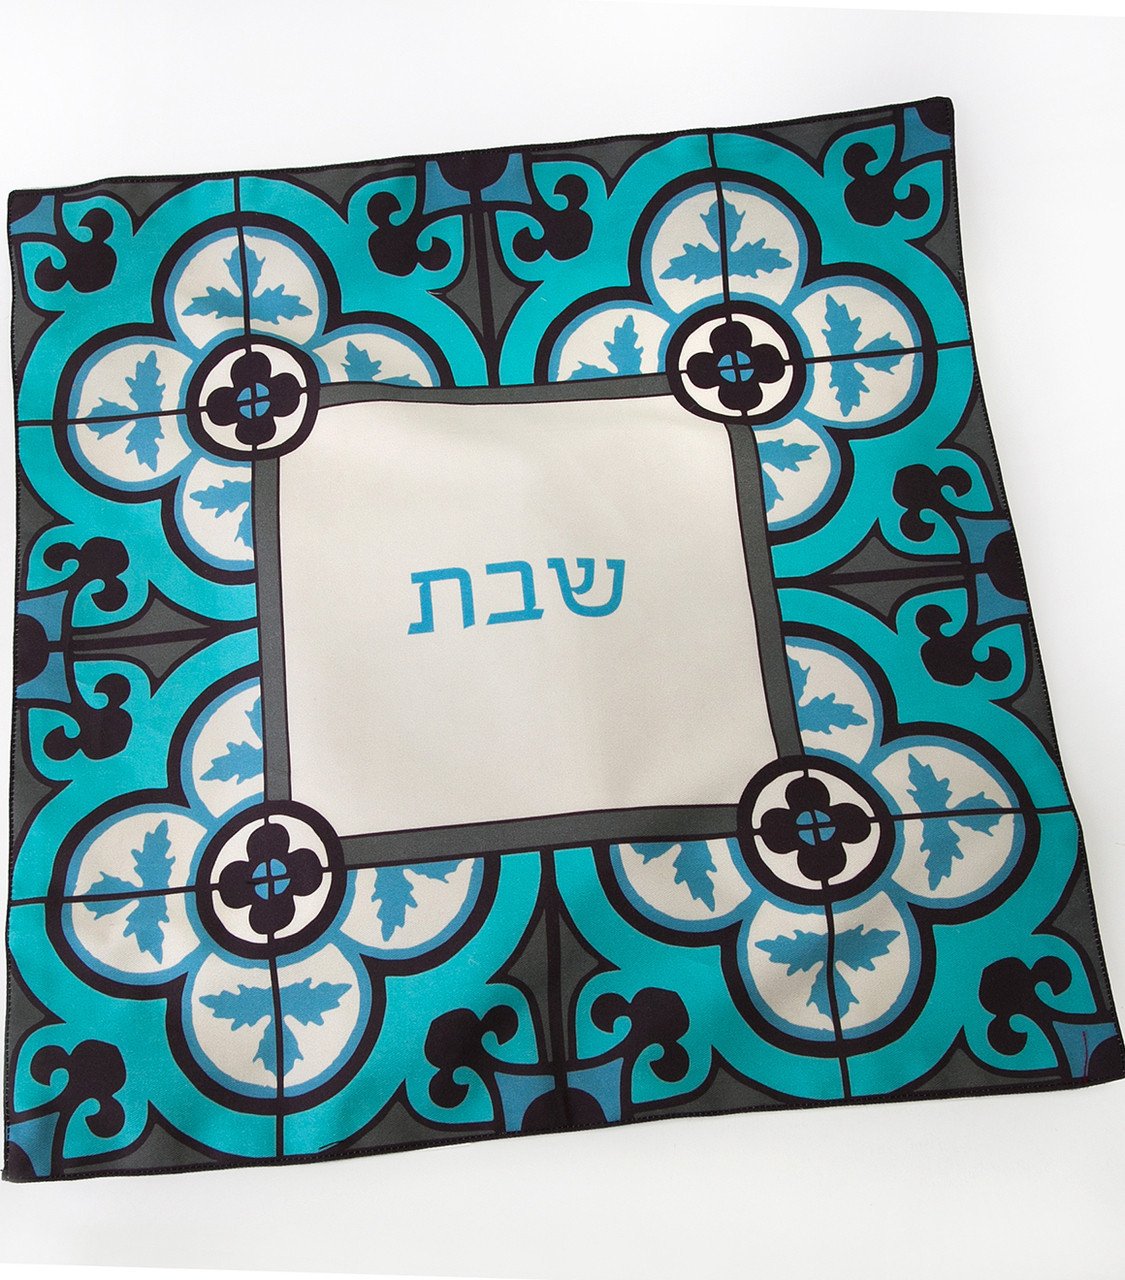 Barbara Shaw Challah Accessory Blues Flower Tile Challah Cover